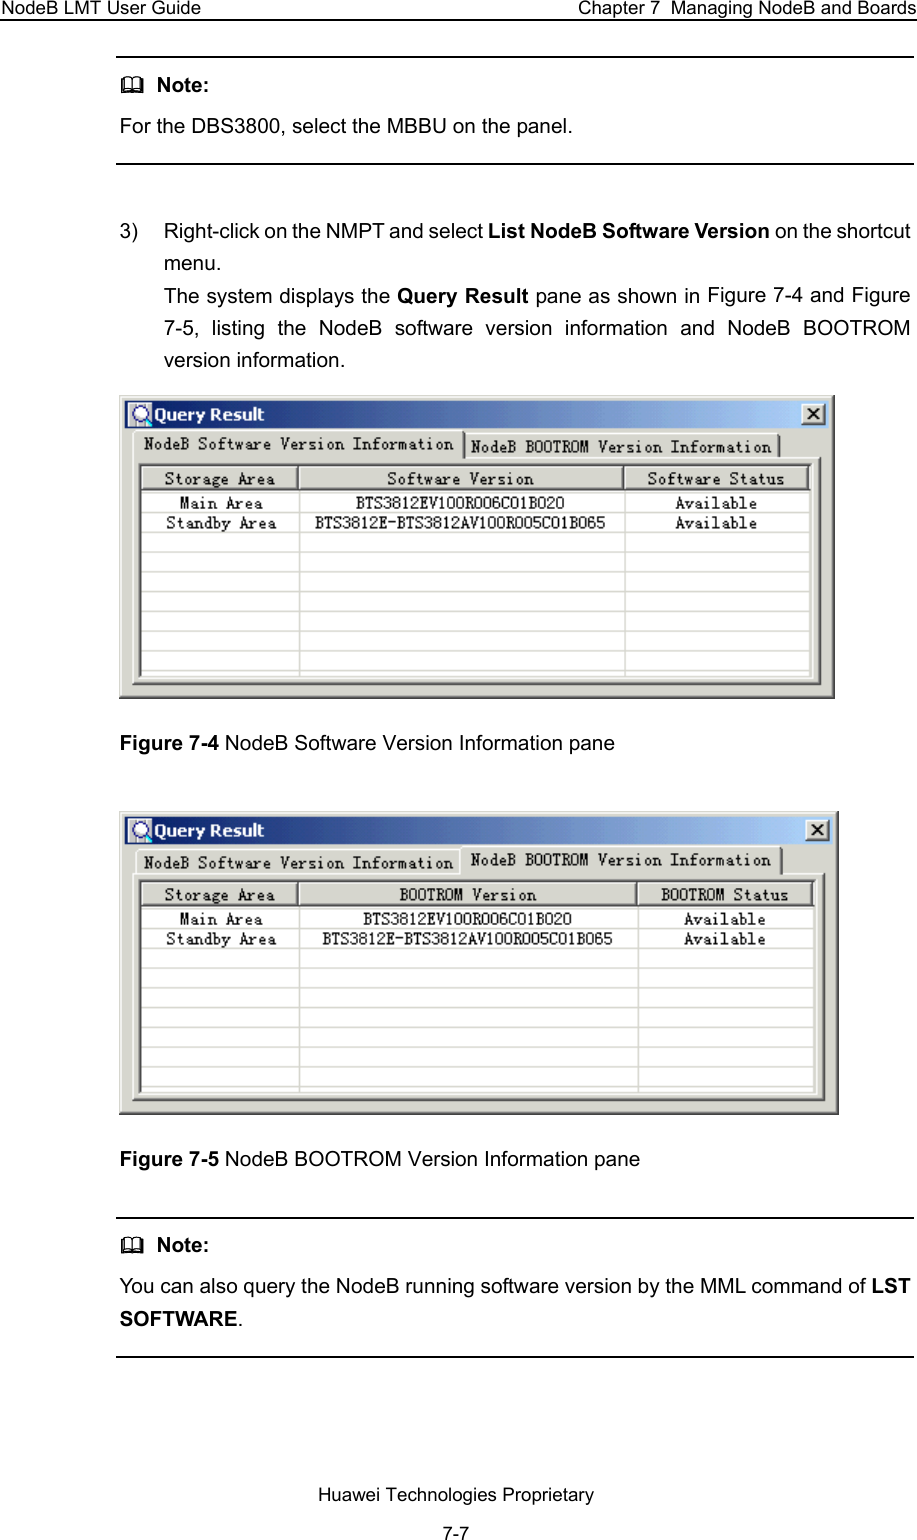 NodeB LMT User Guide  Chapter 7  Managing NodeB and Boards   Note: For the DBS3800, select the MBBU on the panel.  3)  Right-click on the NMPT and select List NodeB Software Version on the shortcut menu.  The system displays the Query Result pane as shown in Figure 7-4 and Figure 7-5, listing the NodeB software version information and NodeB BOOTROM version information.   Figure 7-4 NodeB Software Version Information pane  Figure 7-5 NodeB BOOTROM Version Information pane   Note:  You can also query the NodeB running software version by the MML command of LST SOFTWARE.   Huawei Technologies Proprietary 7-7 